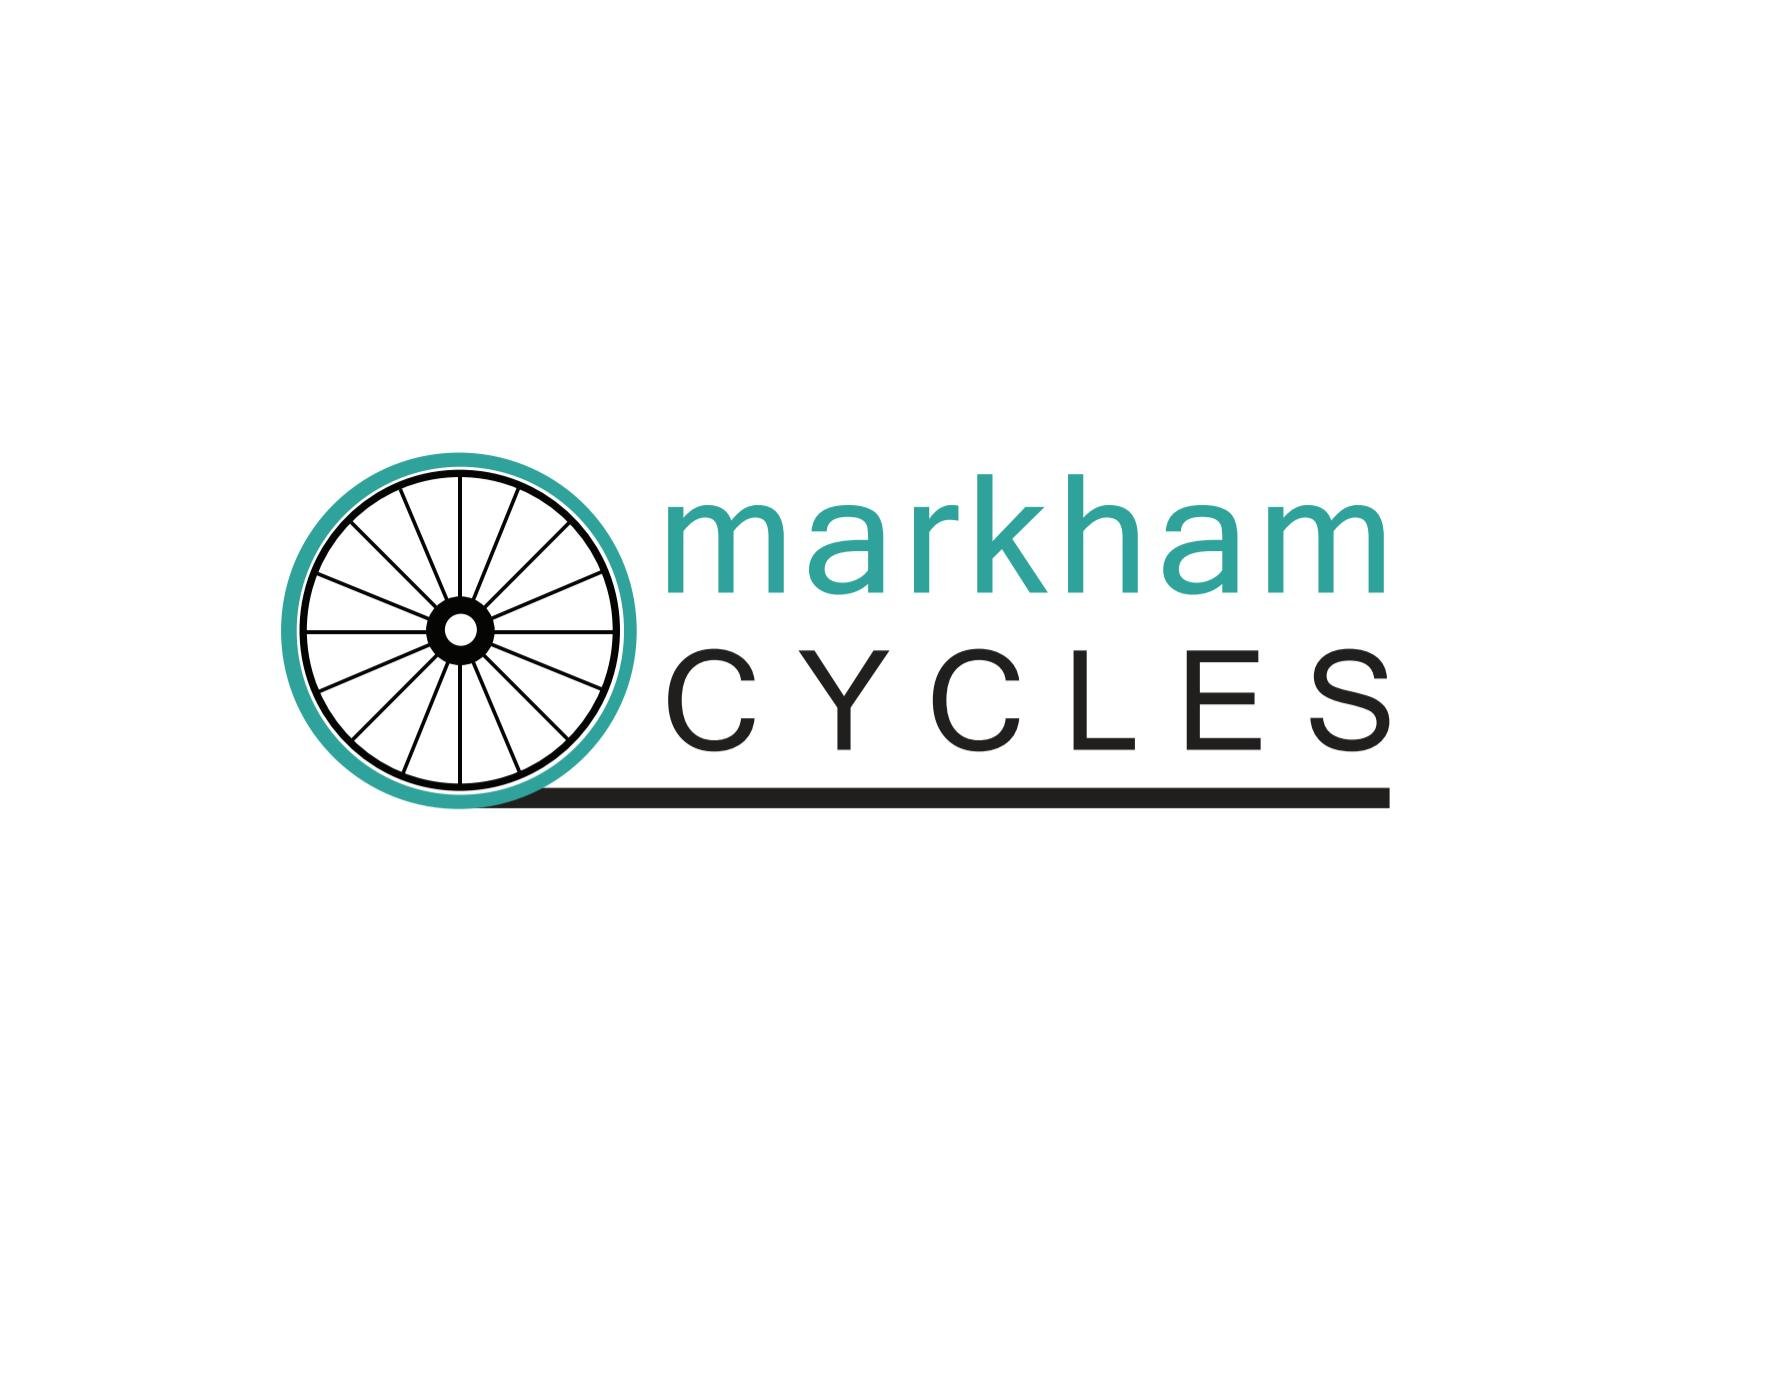 Growing cycling culture in Markham🚴‍♂️🚴‍♀️
Project of @TCATonline & @Cleanair_Canada, in partnership w/ @CityofMarkham, @YRDSB, @markhamlibrary, @CICS_Canada